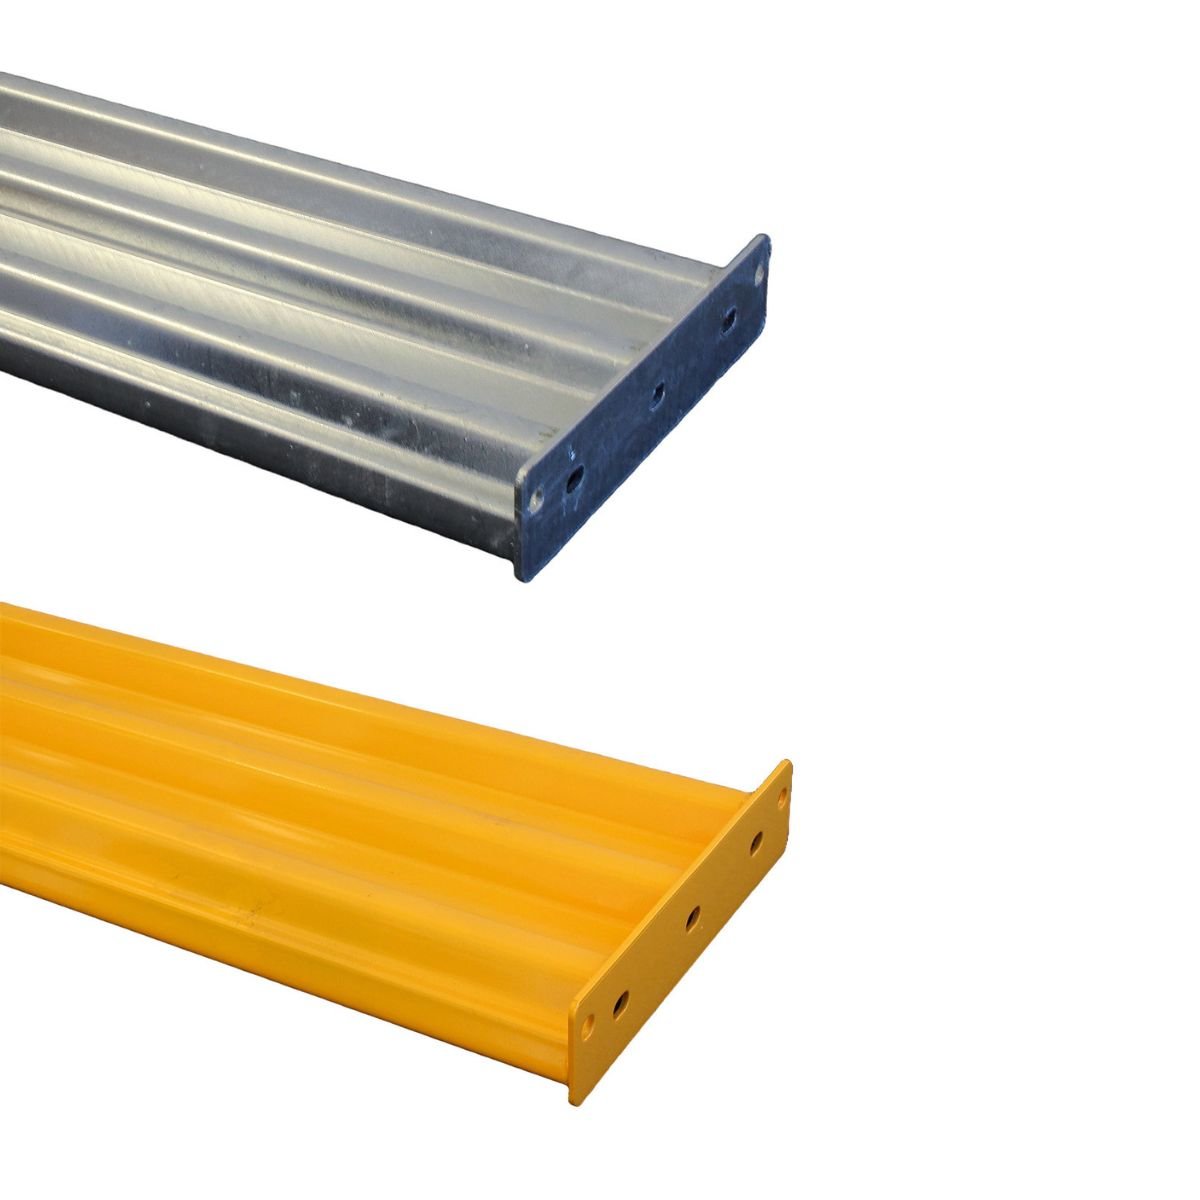 Buy Guardx Traffic Barrier Rails  in Traffic Barriers from GuardX available at Astrolift NZ